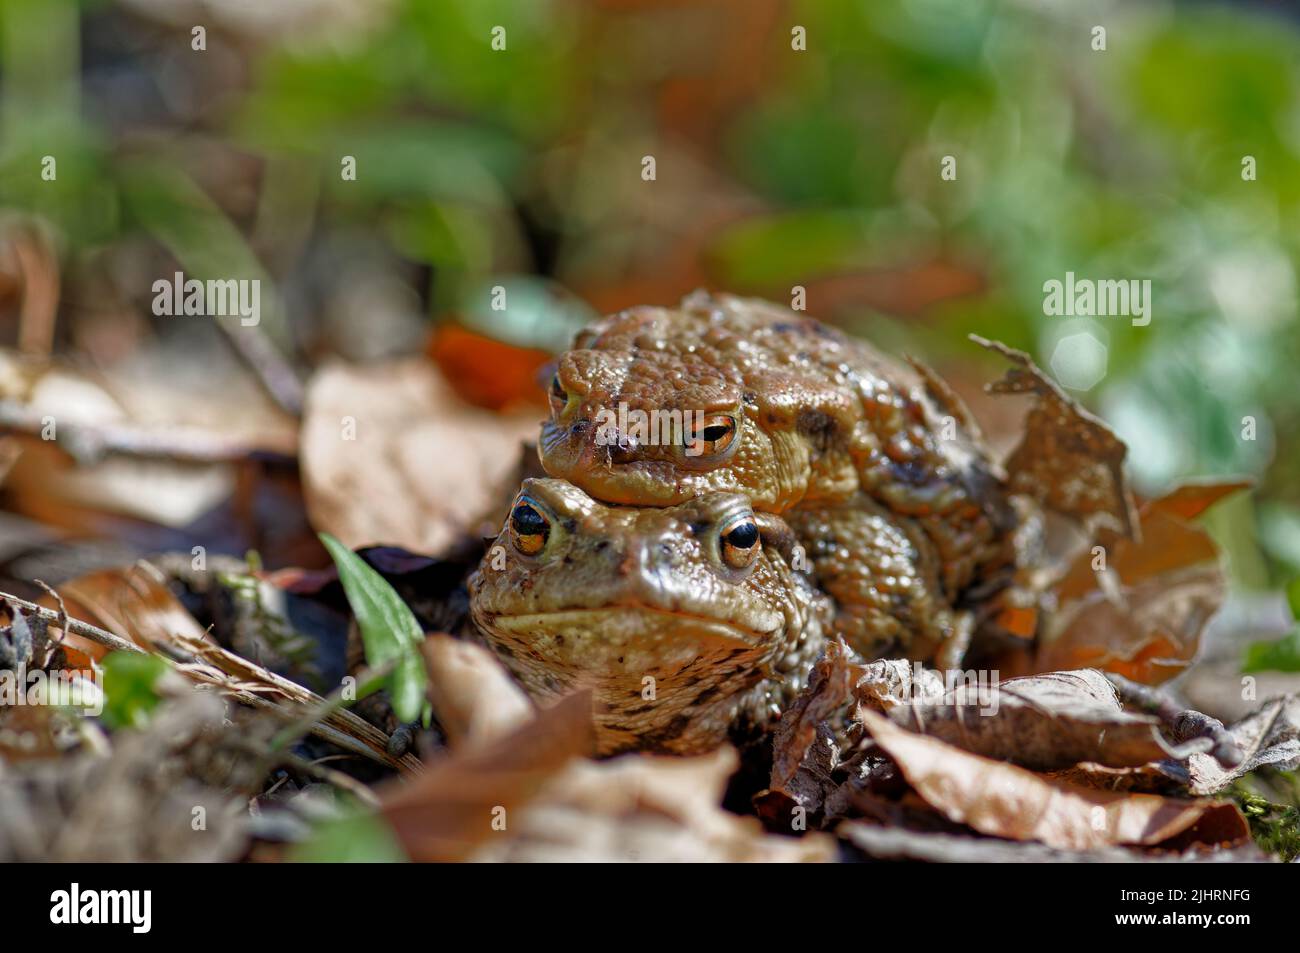 A closeup of two common toads (Bufo bufo) mating on fall leaves Stock Photo